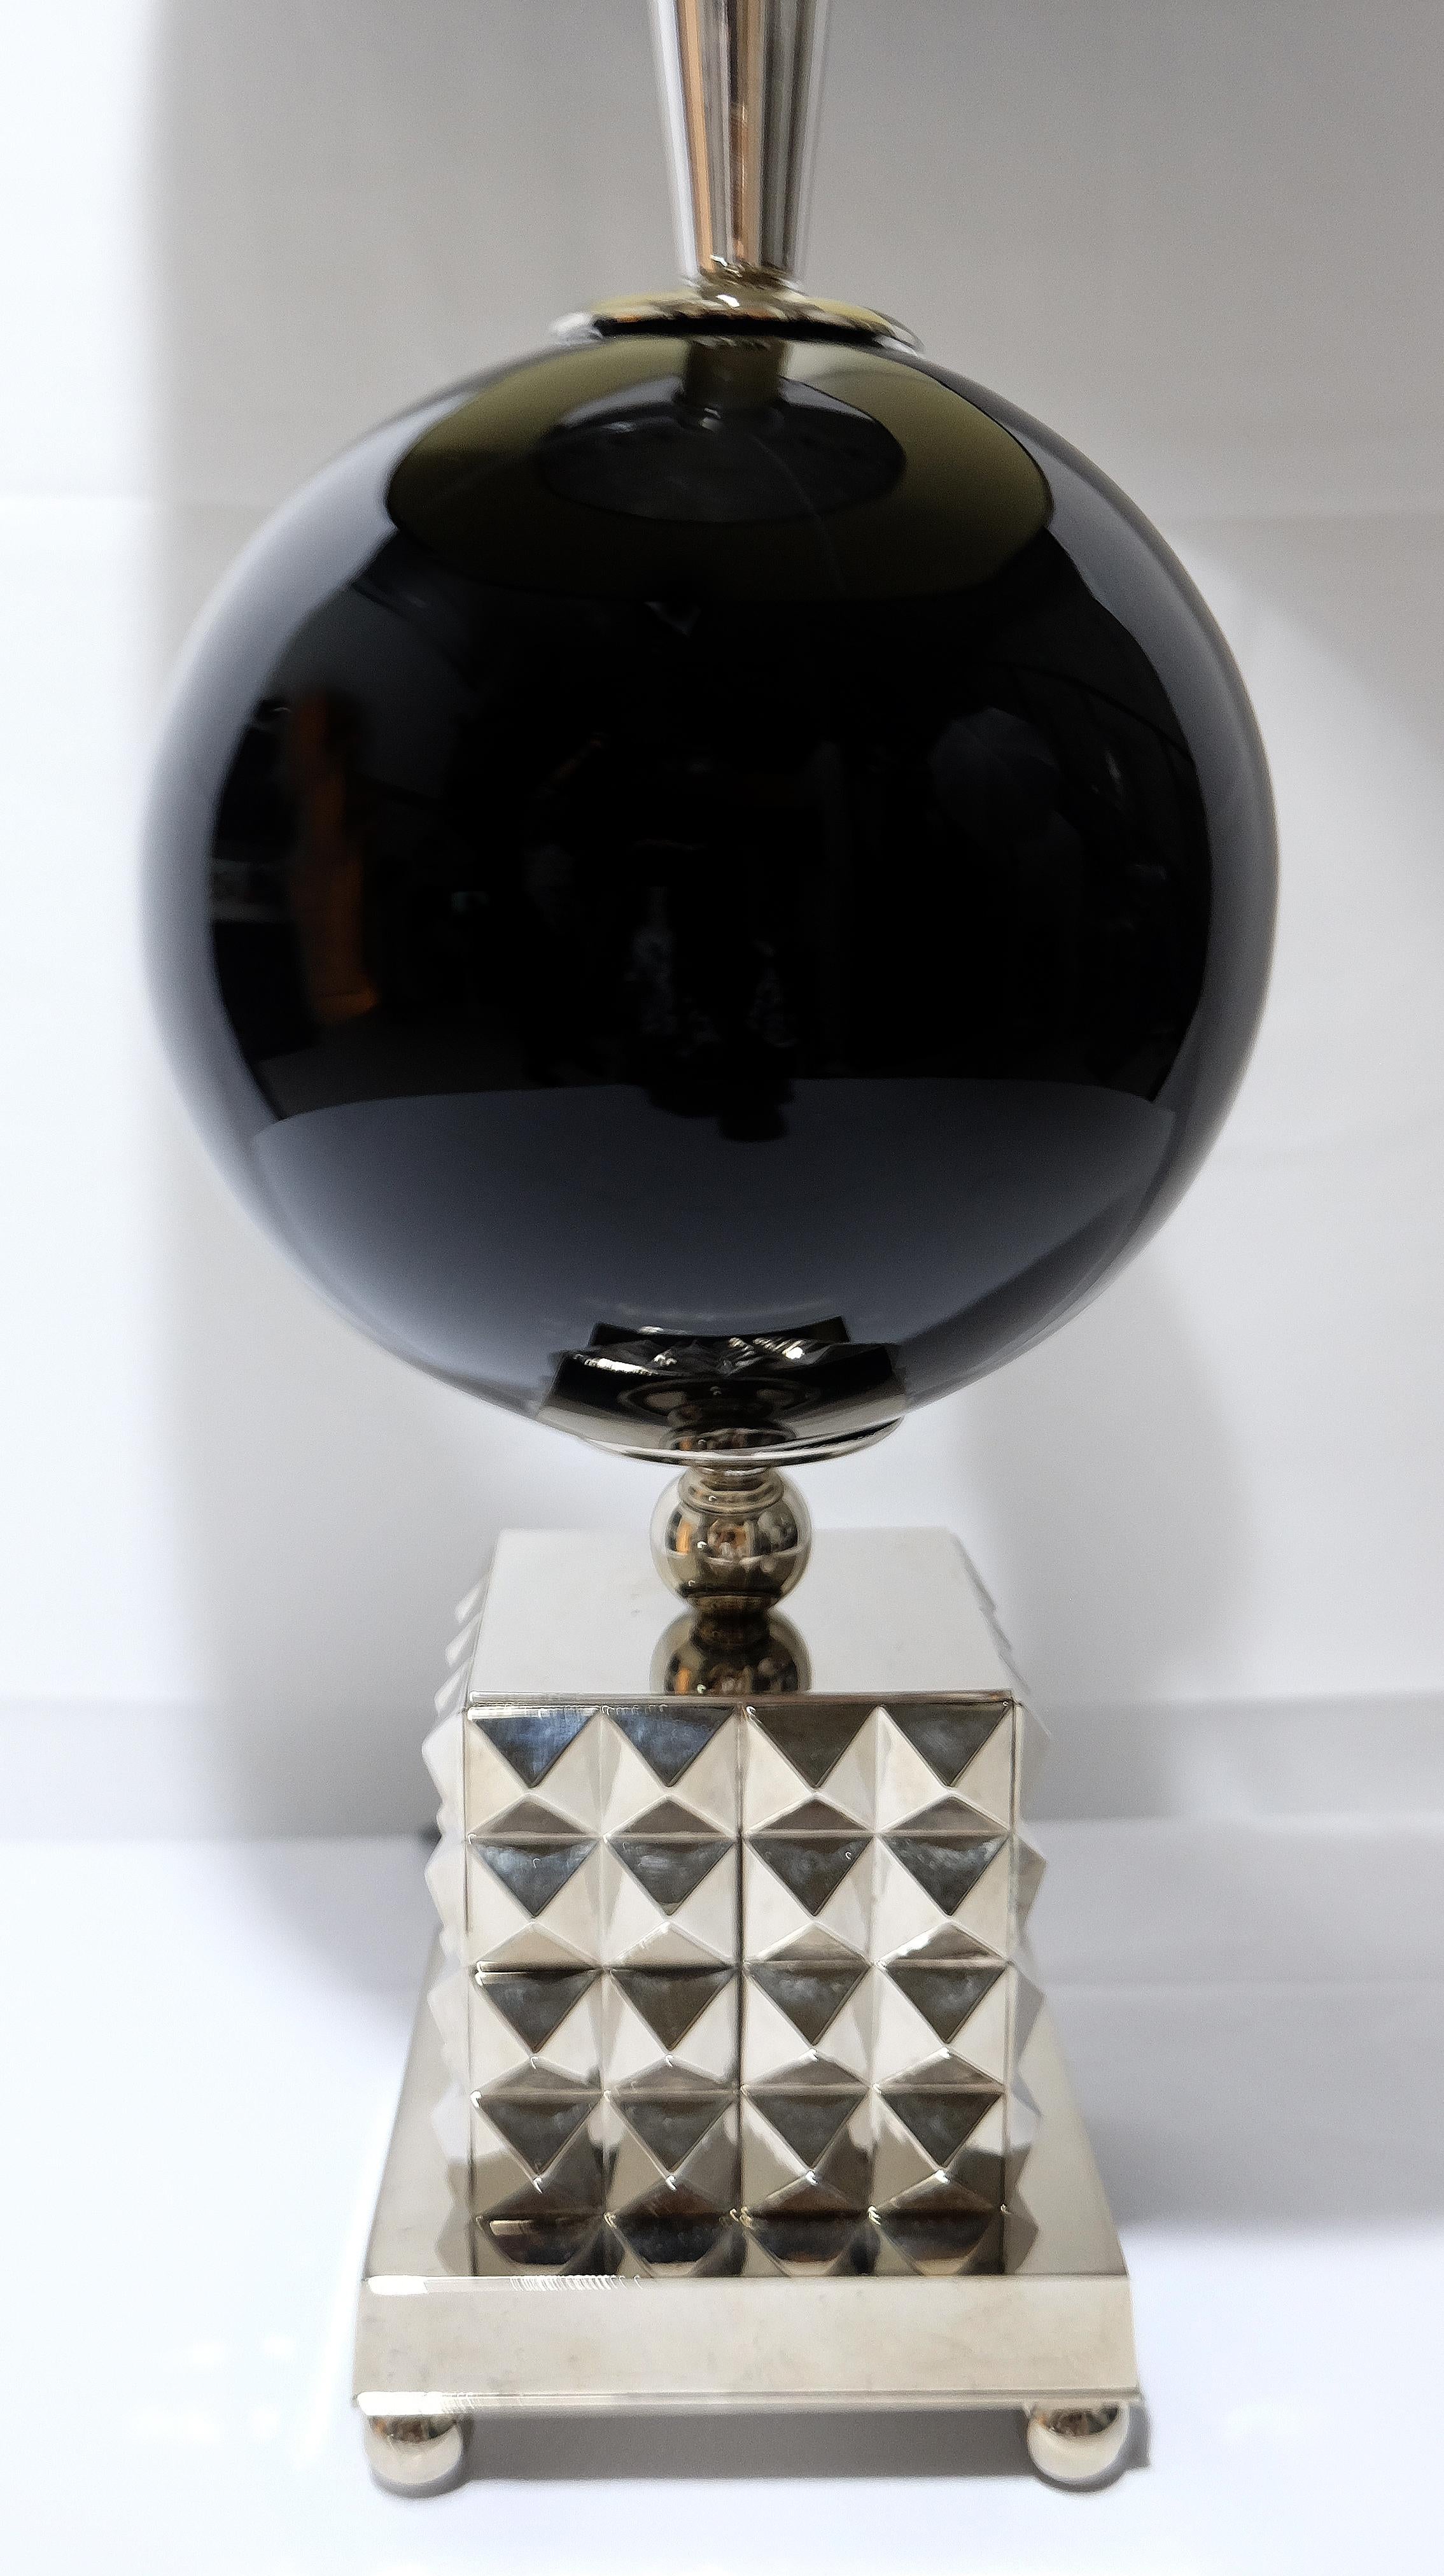 Laudarte Srl Lume Yago Table Lamp in Nickel and Glass, pair Available

Offered for sale is a stunning black glass table lamp from Leo Mirai Collezione of Laudarte Srl with a nickel finish.
The Leo Mirai Collection grew from the prestigious